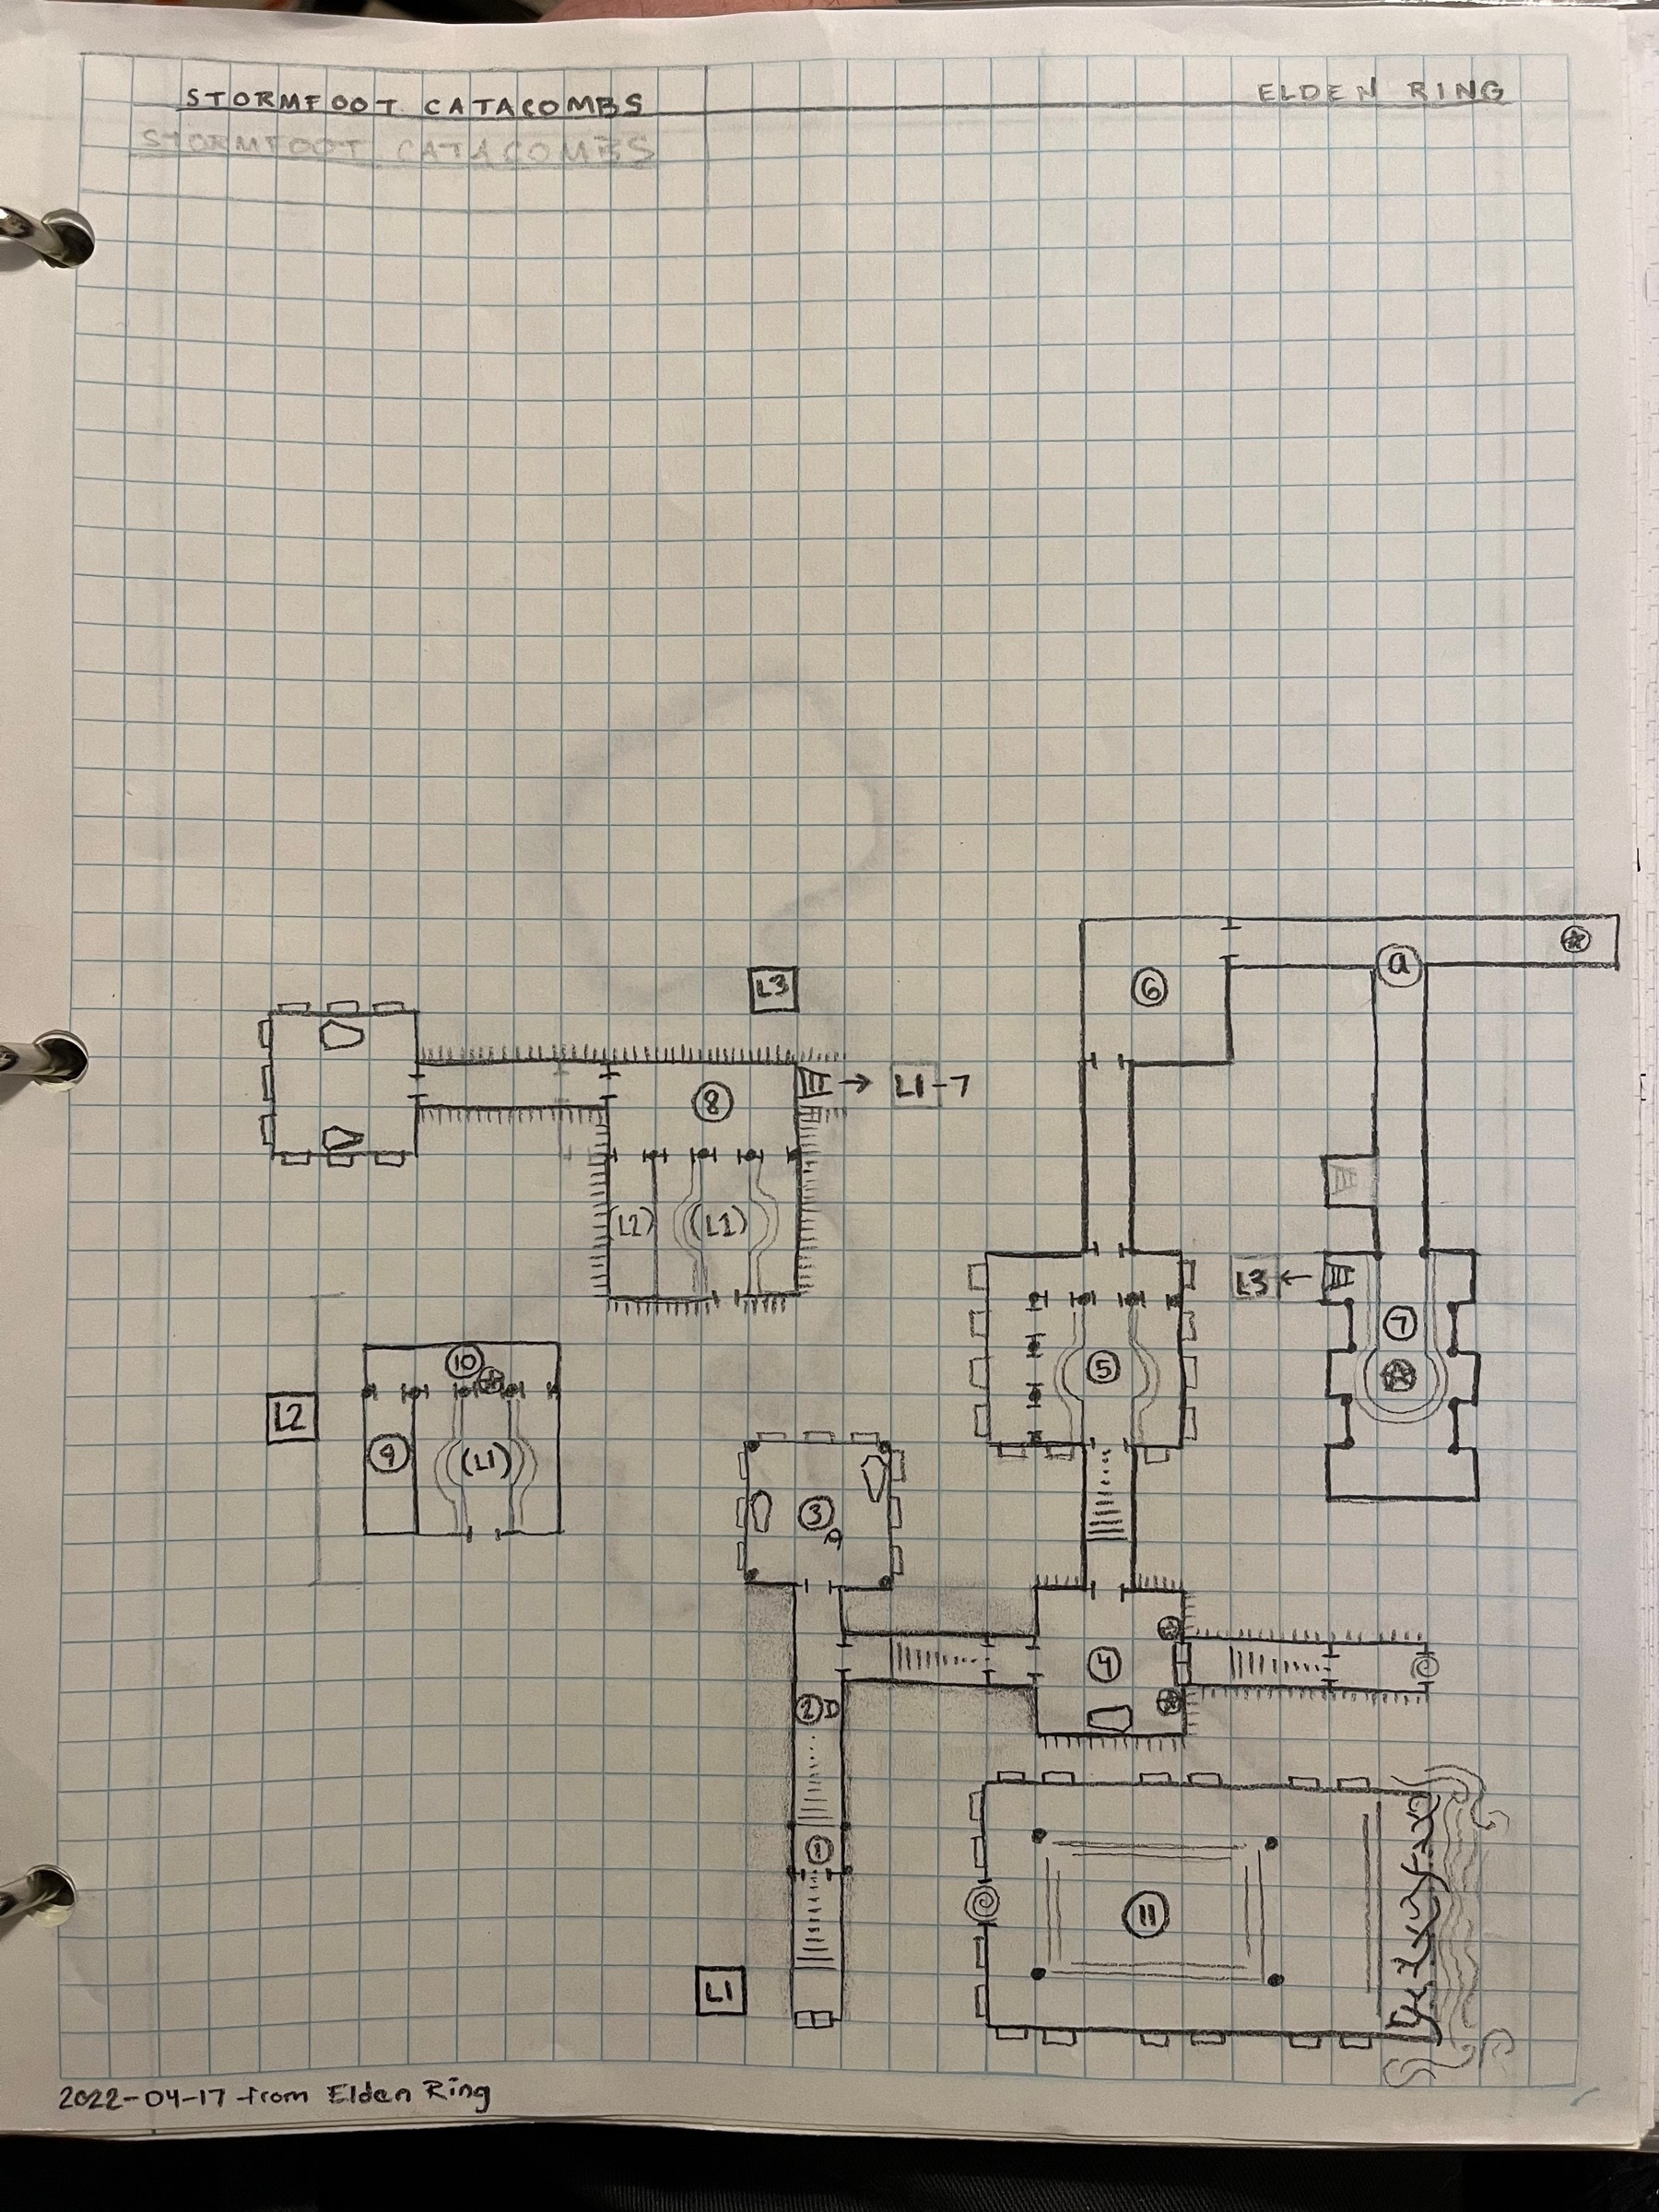 A hand-drawn map of Stormfoot Catacombs